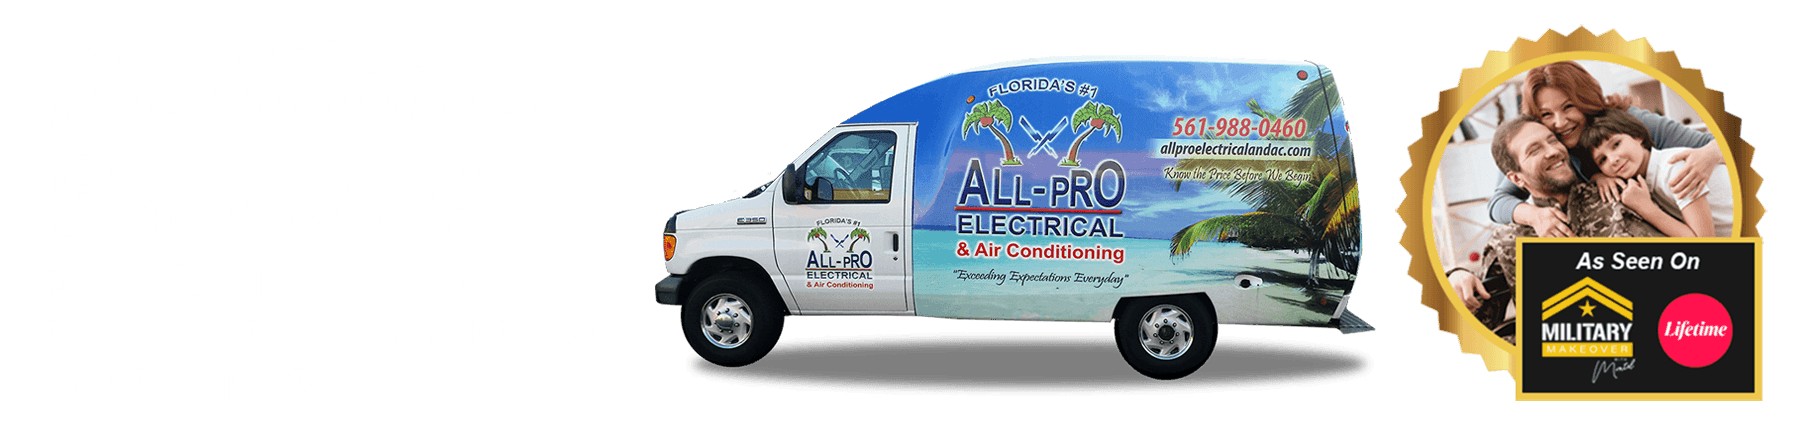 All-Pro Electrical & Air Conditioning Boca Raton Florida AC Financing